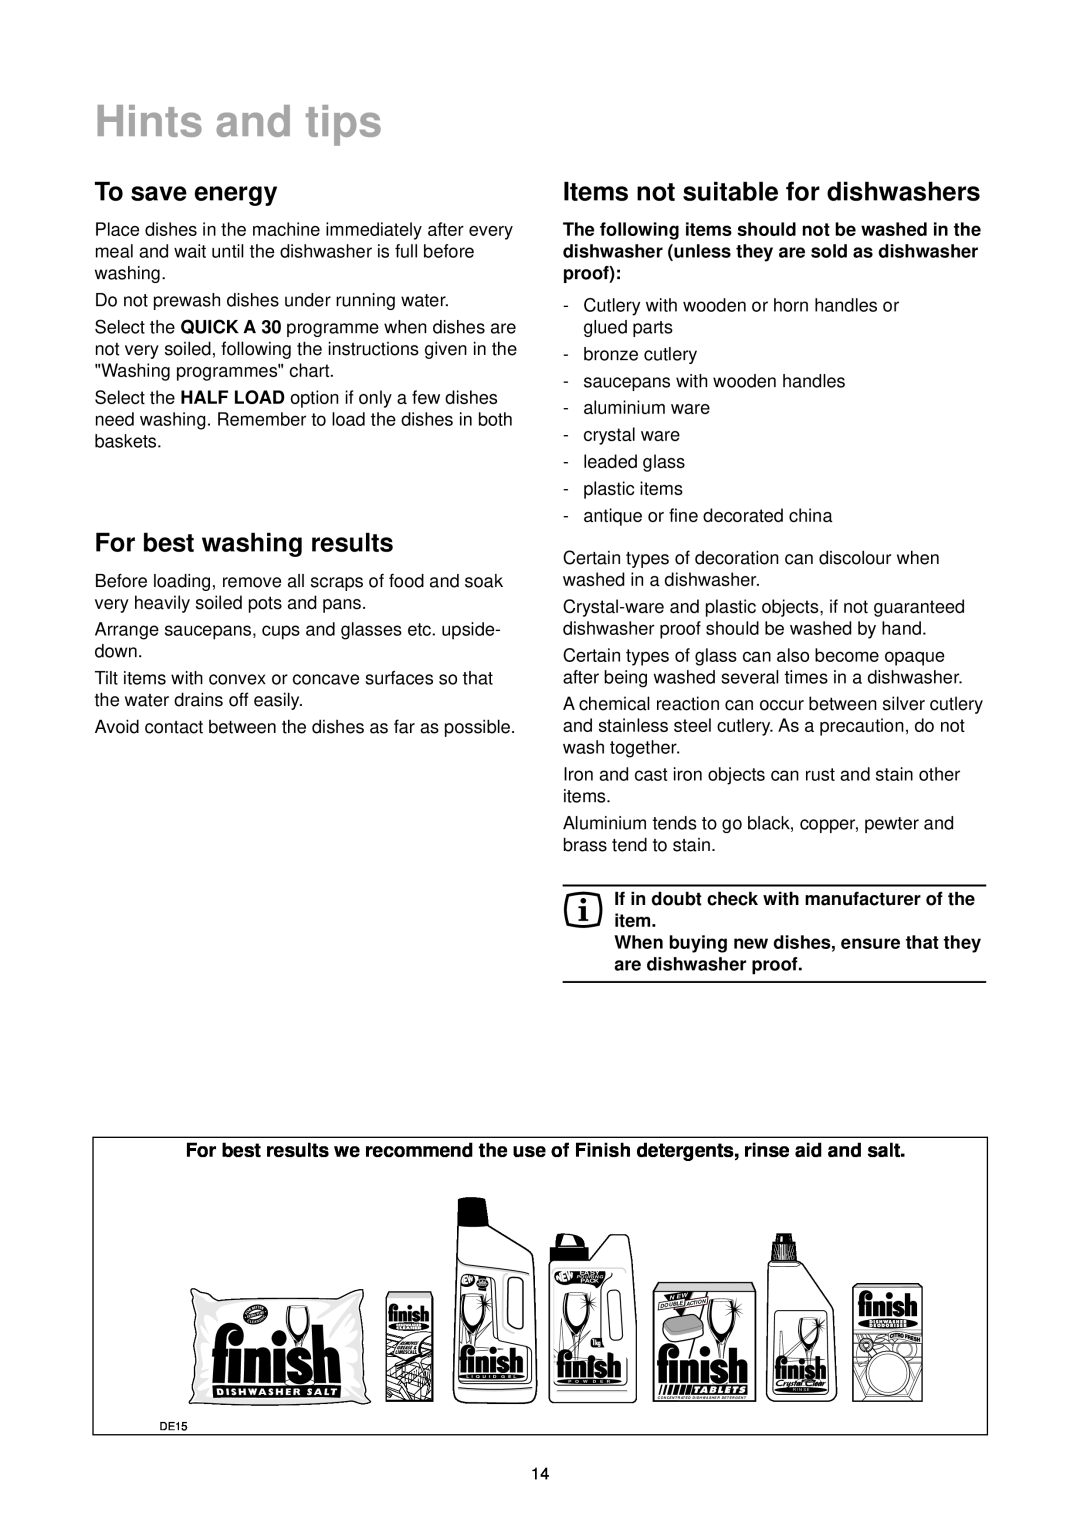 Zanussi DE 6965 Hints and tips, To save energy, For best washing results, Items not suitable for dishwashers, Quick A 